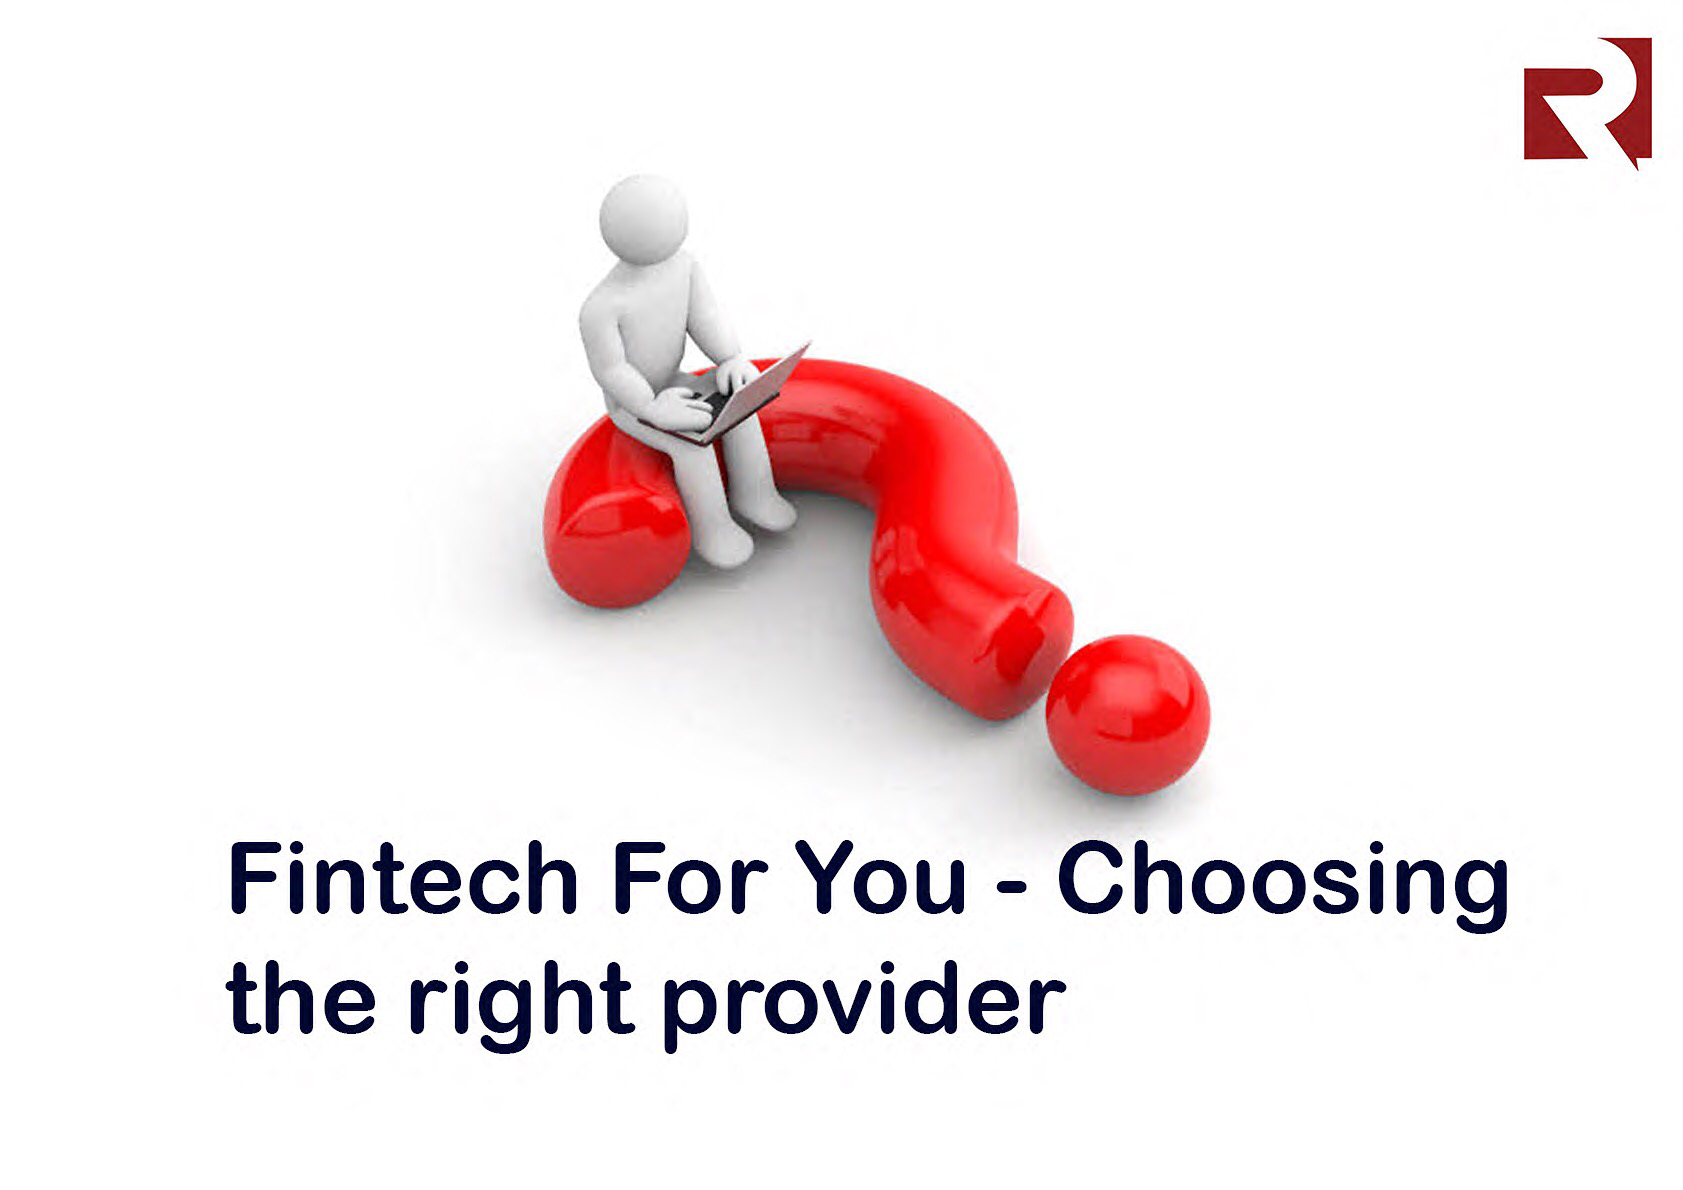 Fintech For You - choosing the right provider